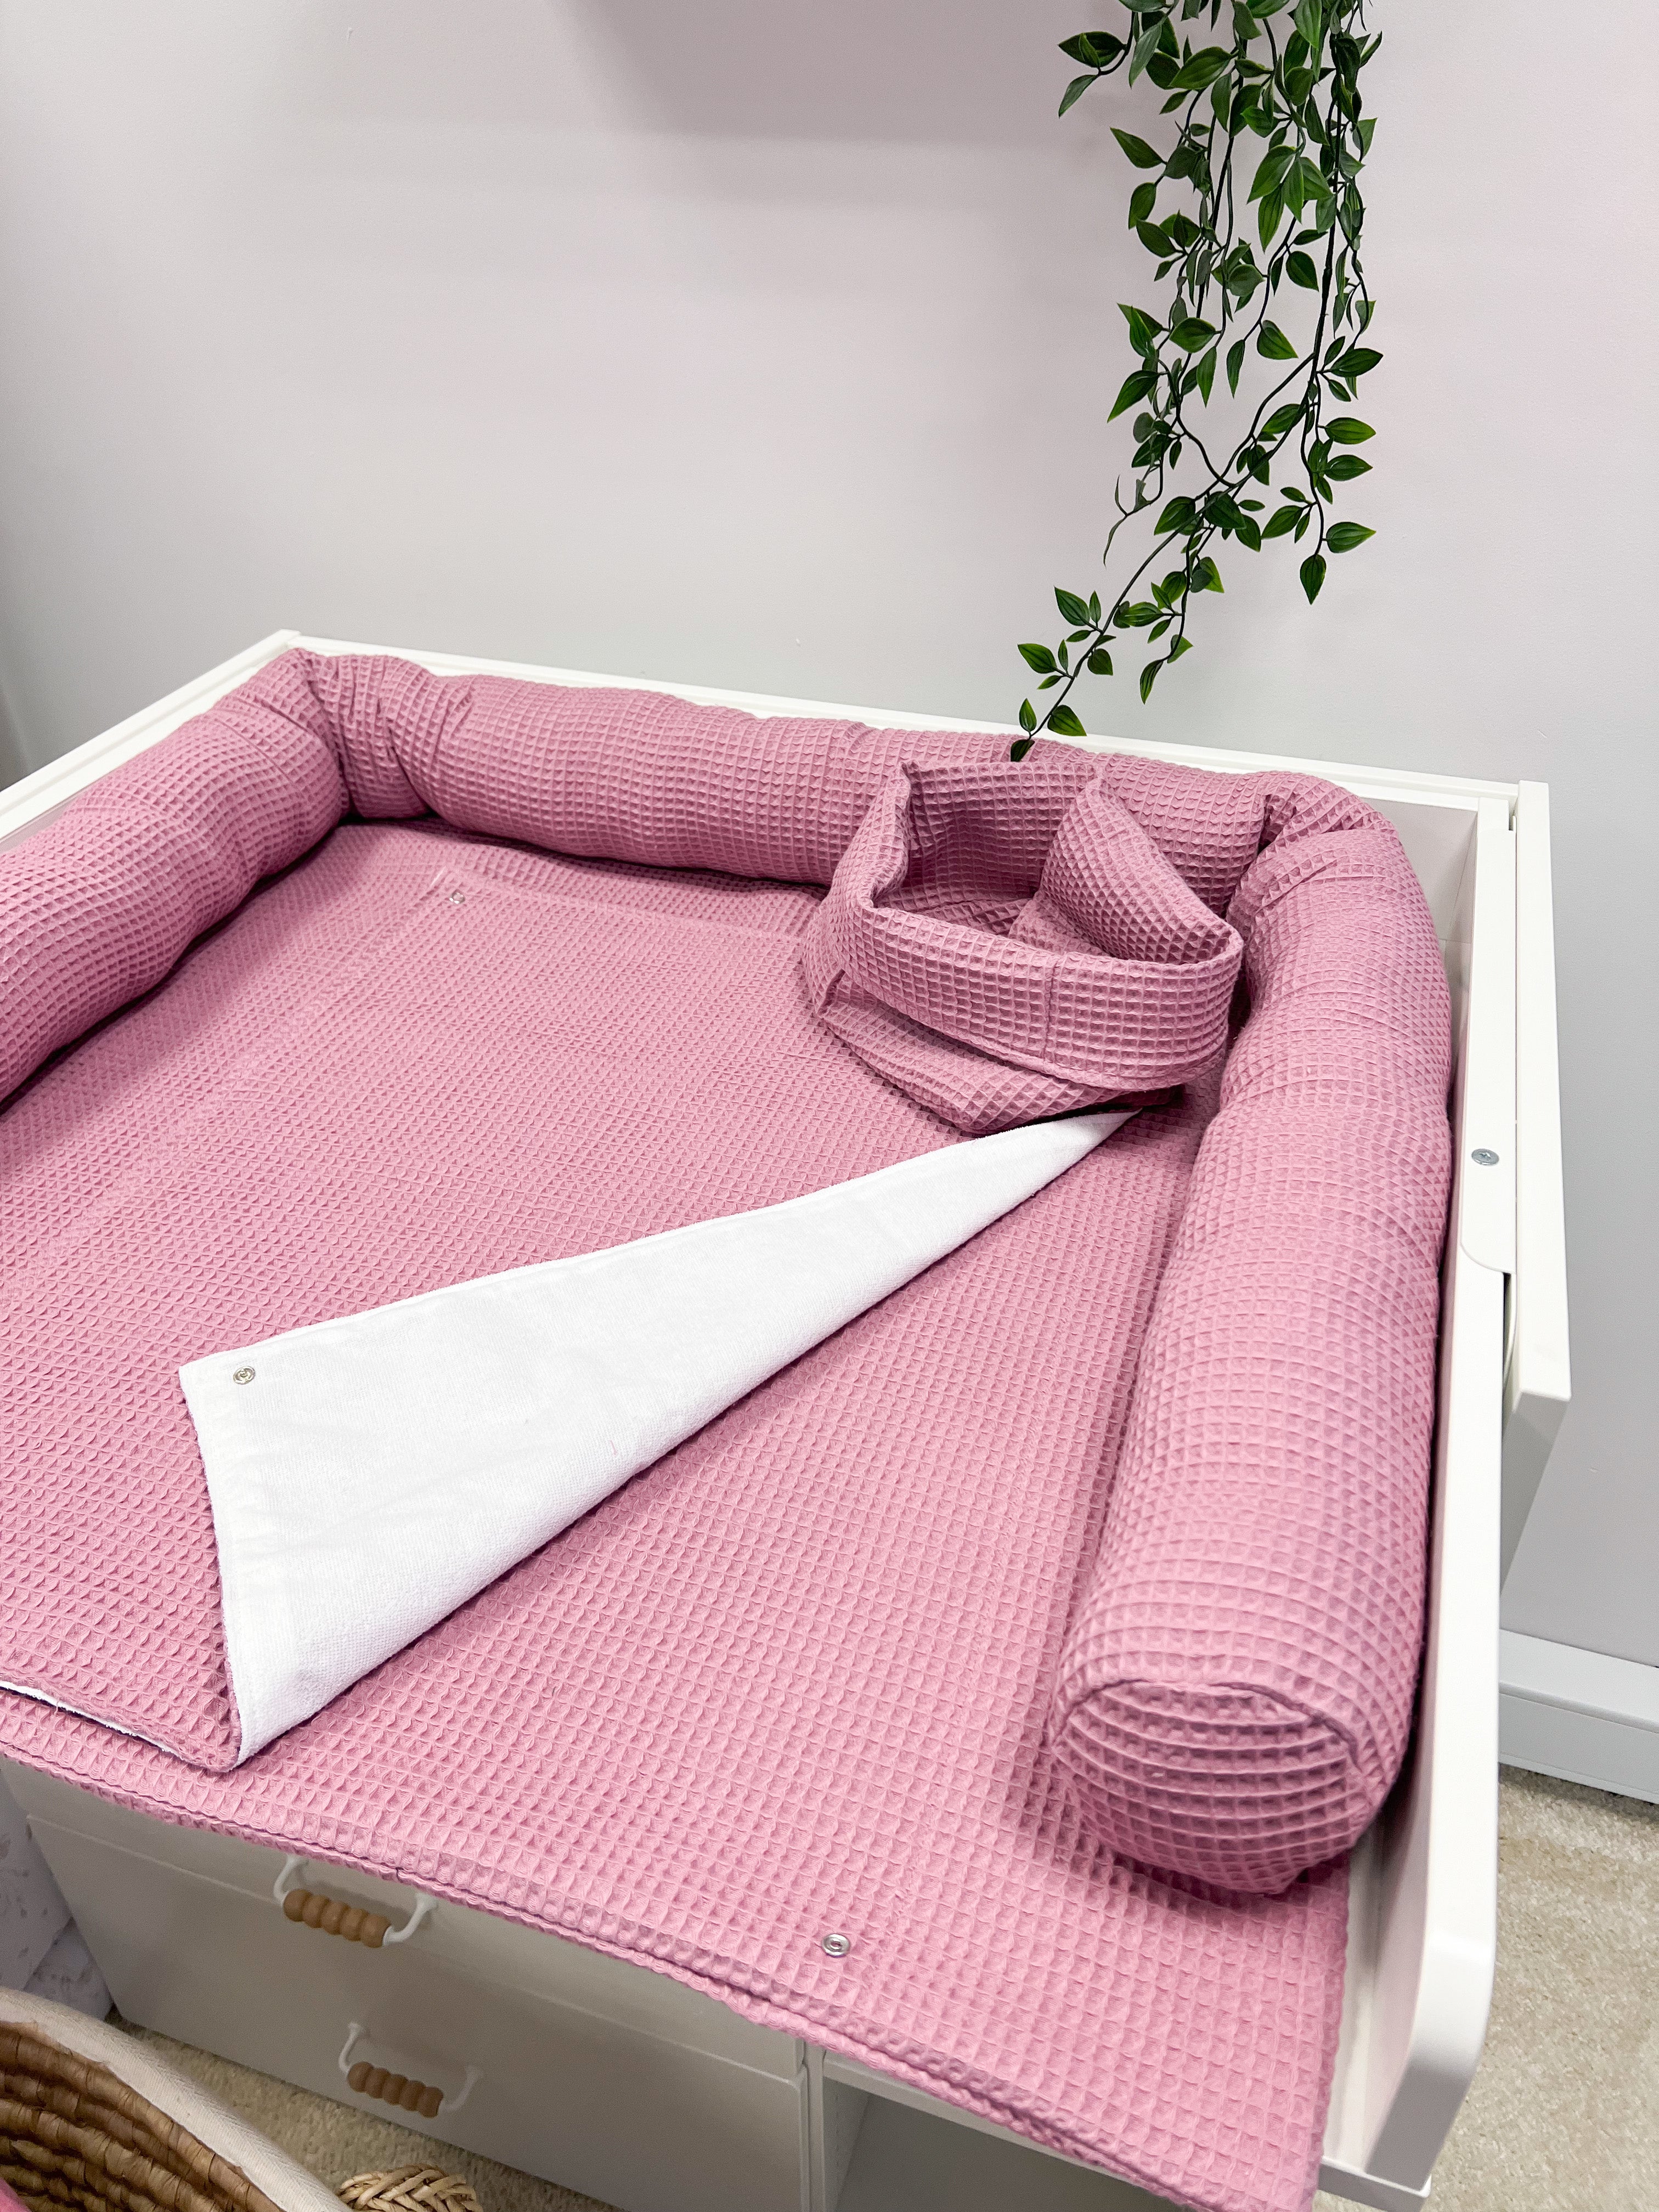 Cotton changing pad - Classic Rose pink